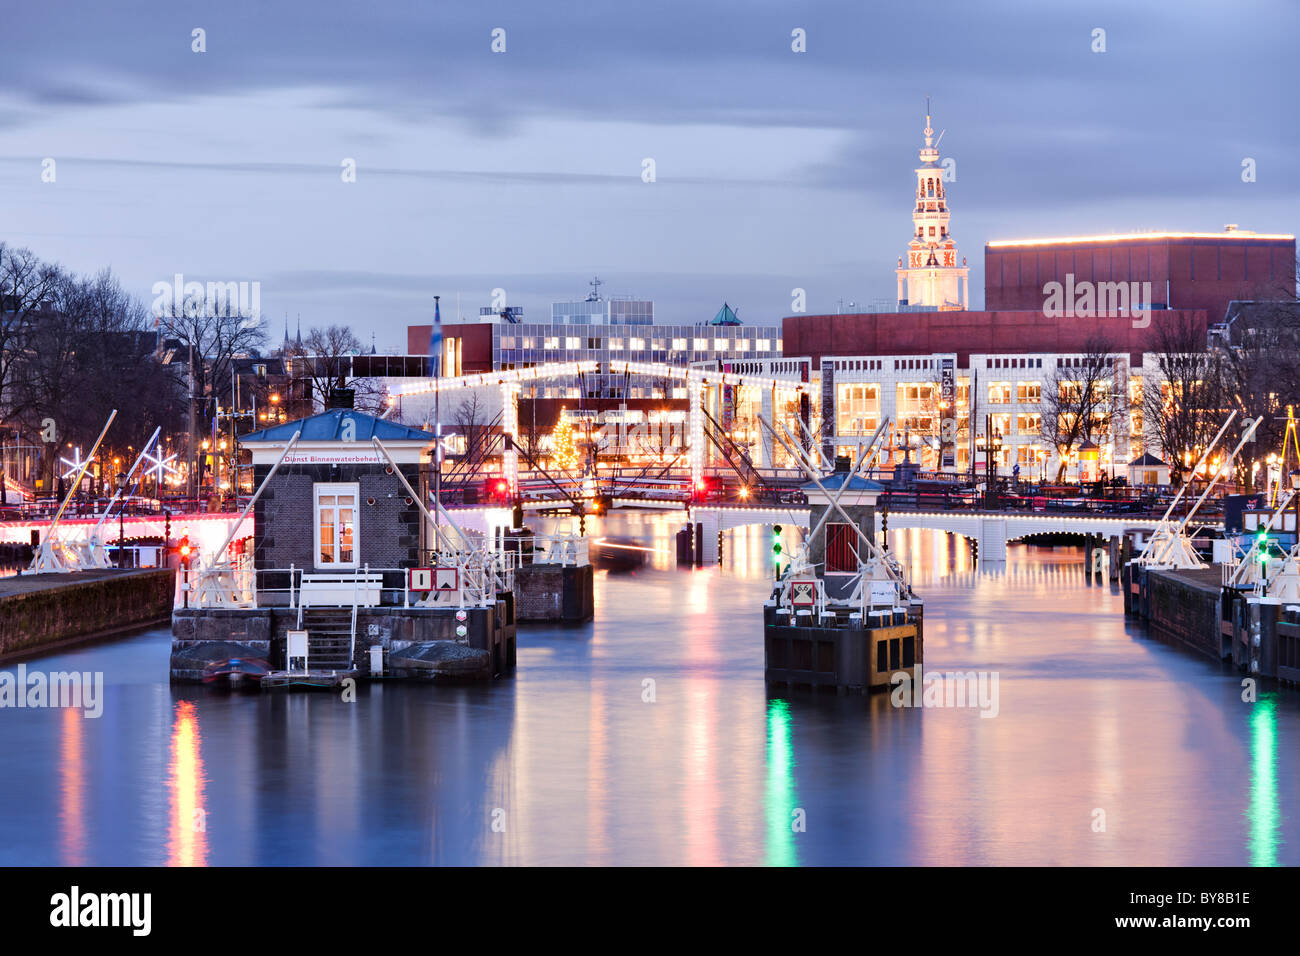 Amsterdam Amstel River with Skinny Bridge, Magere Brug and Muziektheater, Opera House at dusk in winter. Stock Photo